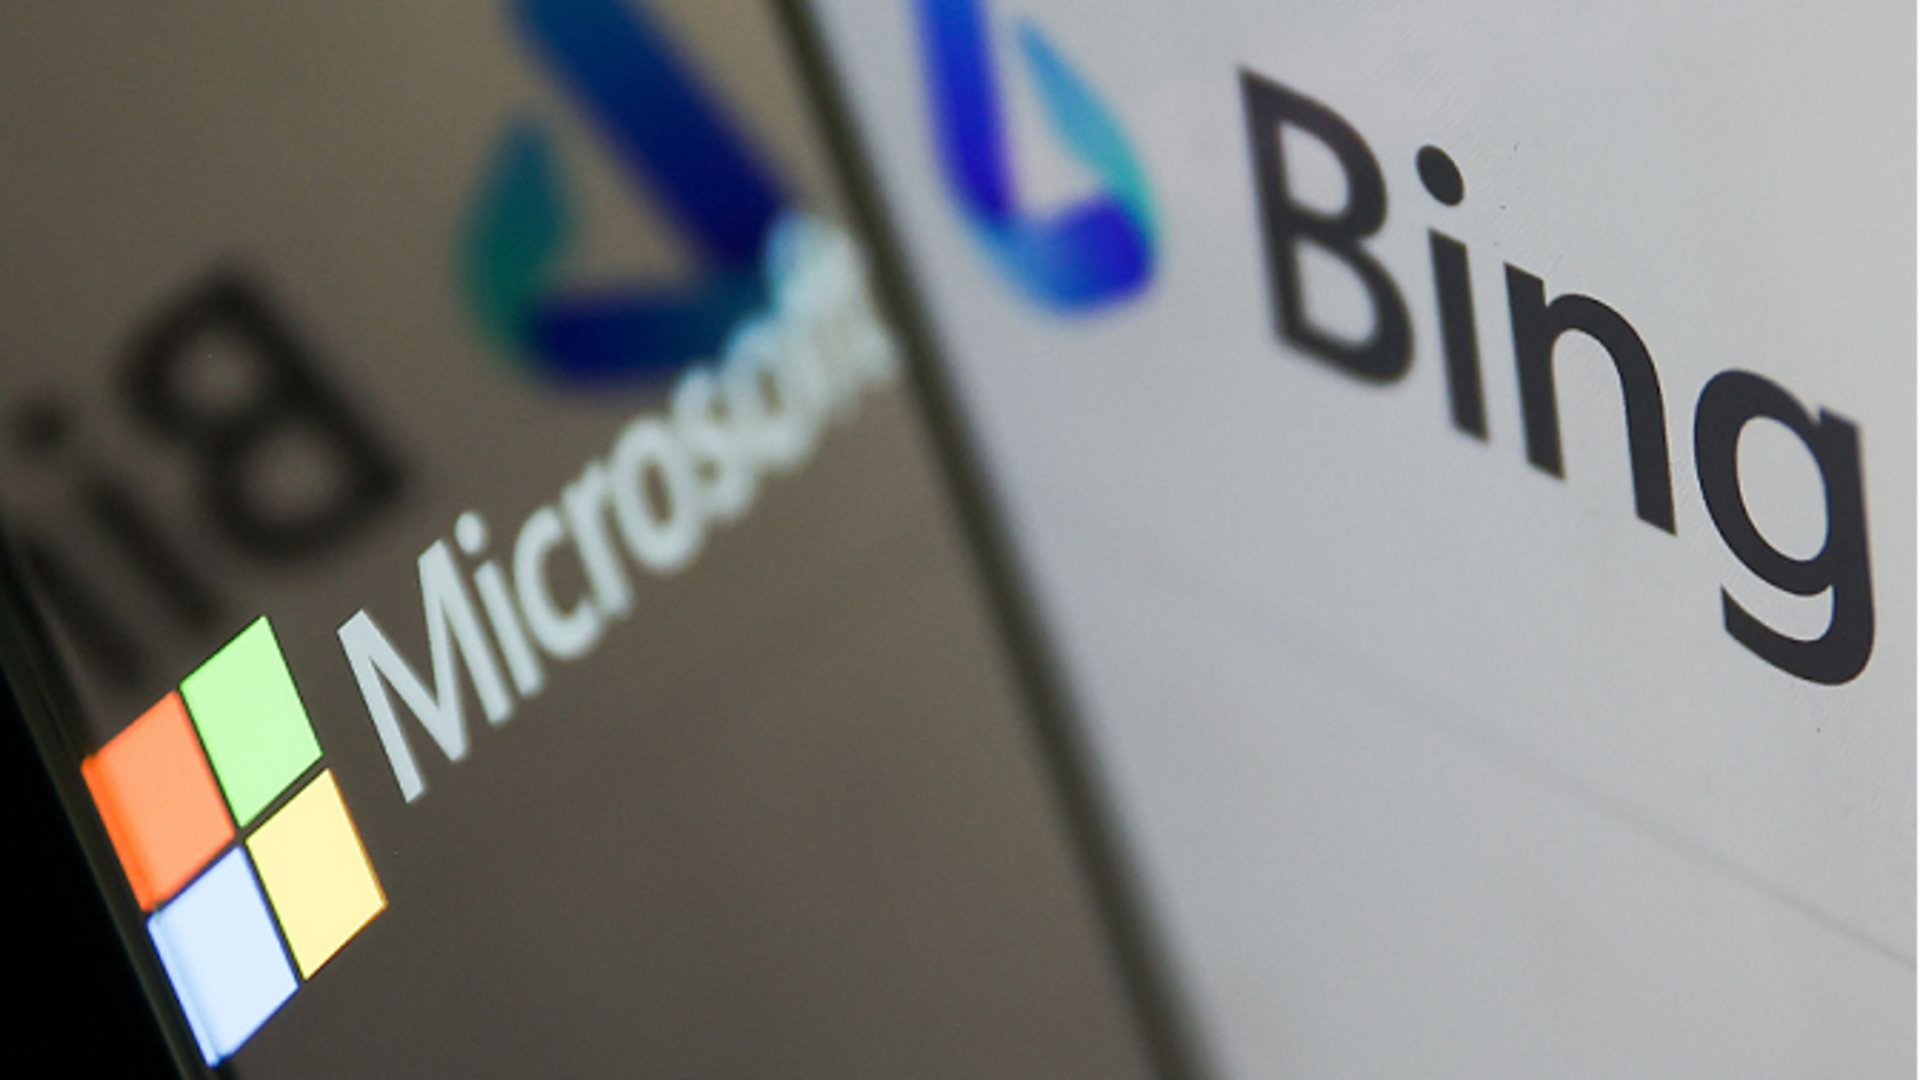 Microsoft considered selling Bing search engine to Apple in 2020